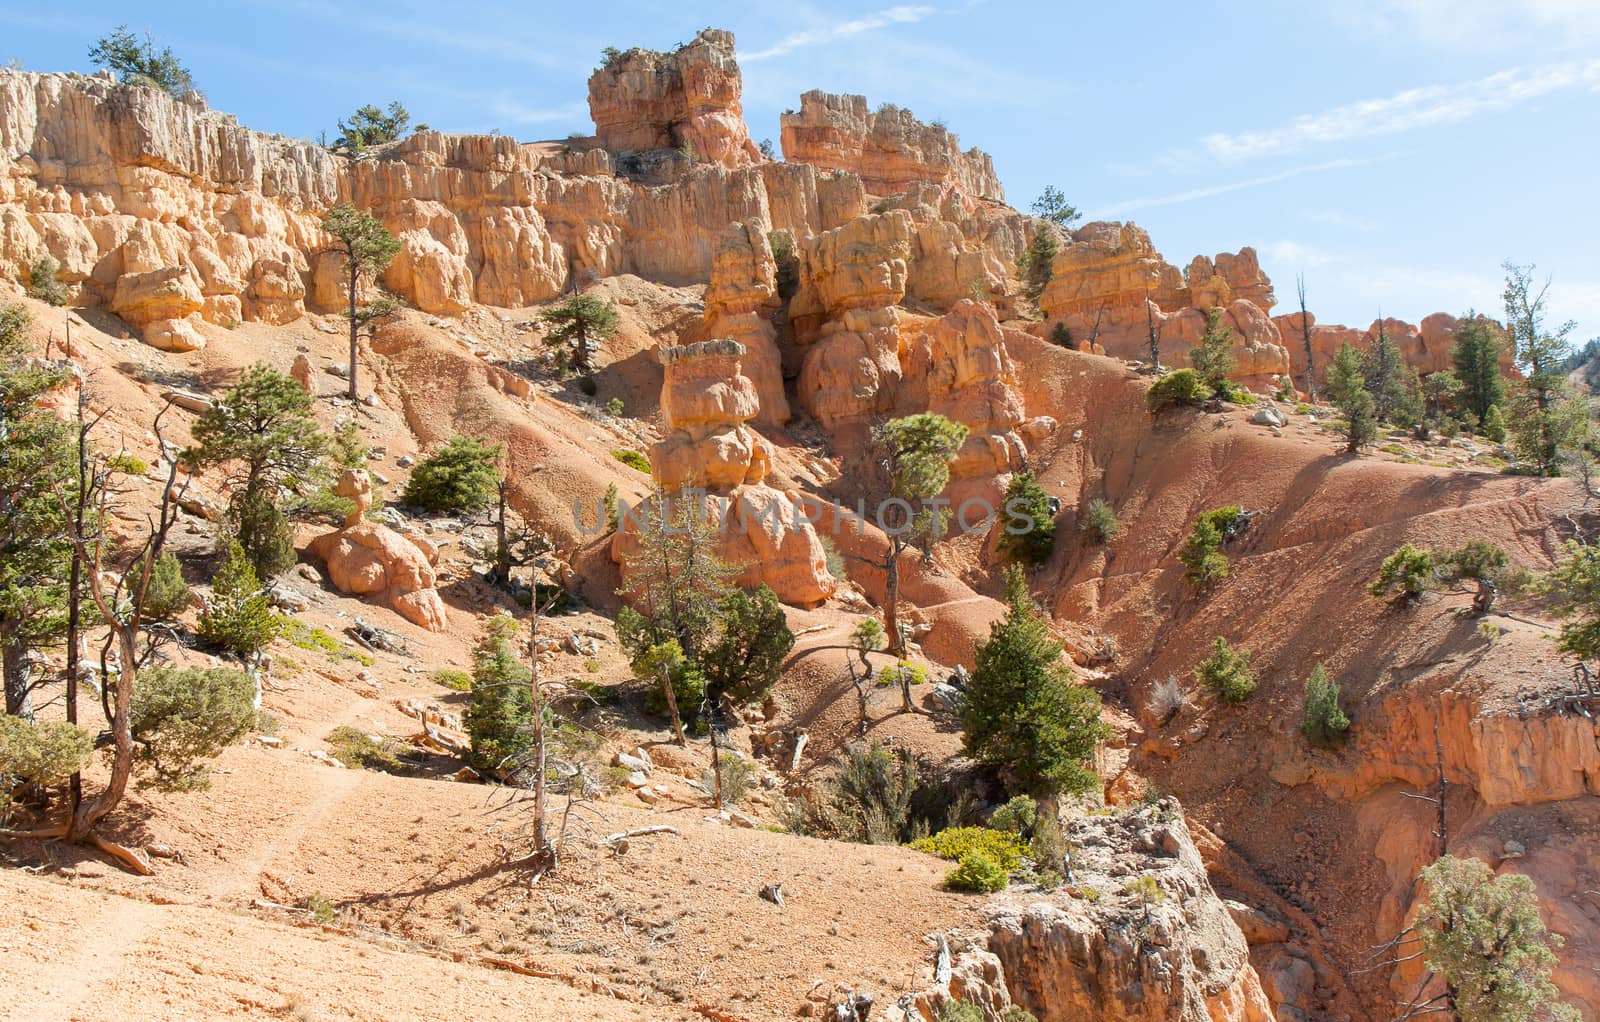 Red Canyon is located just outside of Bryce Canyon and is a significant geological epic in its own right. It is a great hiking area with fantastic formations and scenic views.